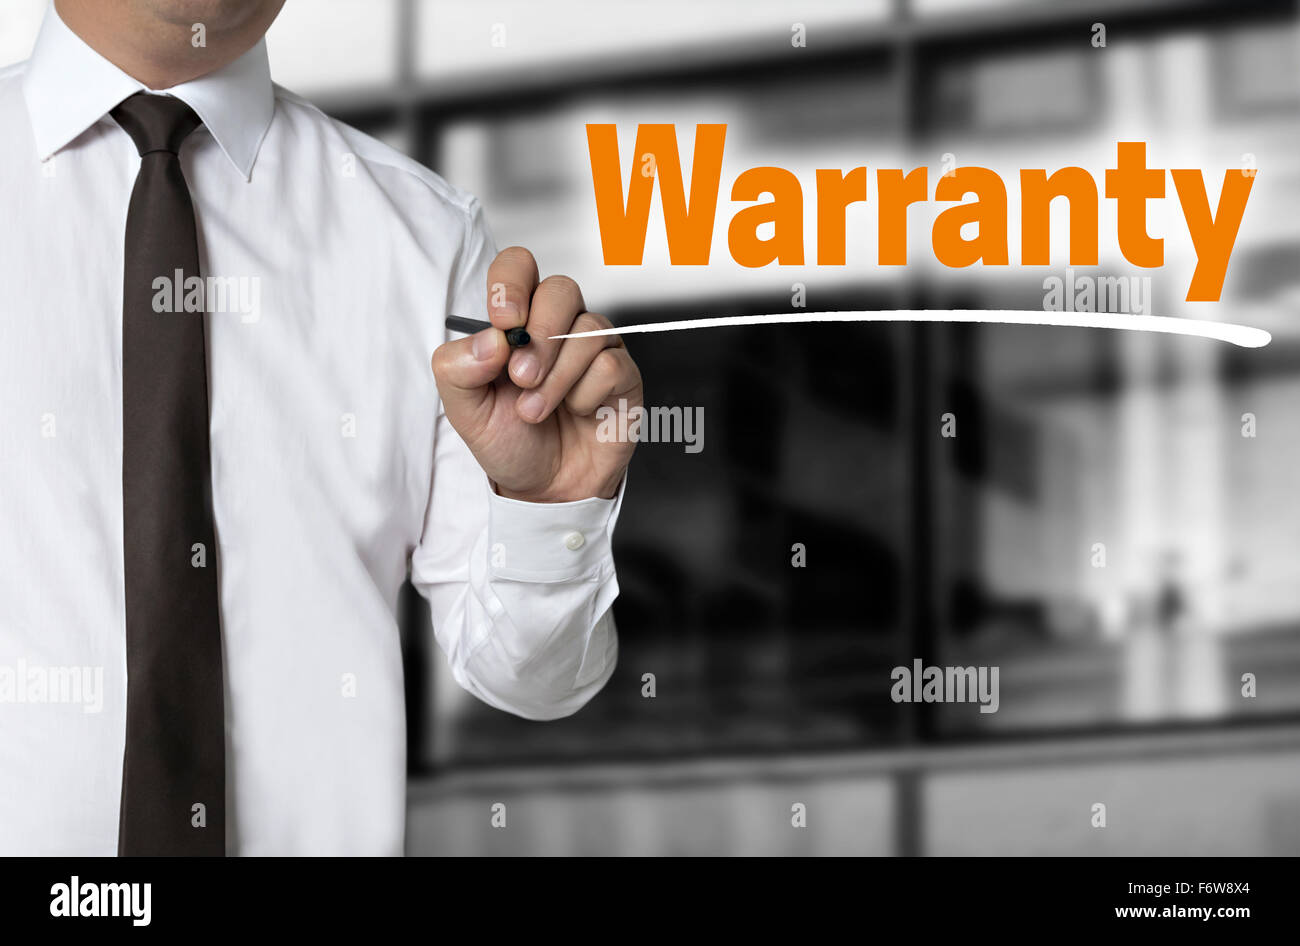 Warranty is written by businessman background concept. Stock Photo